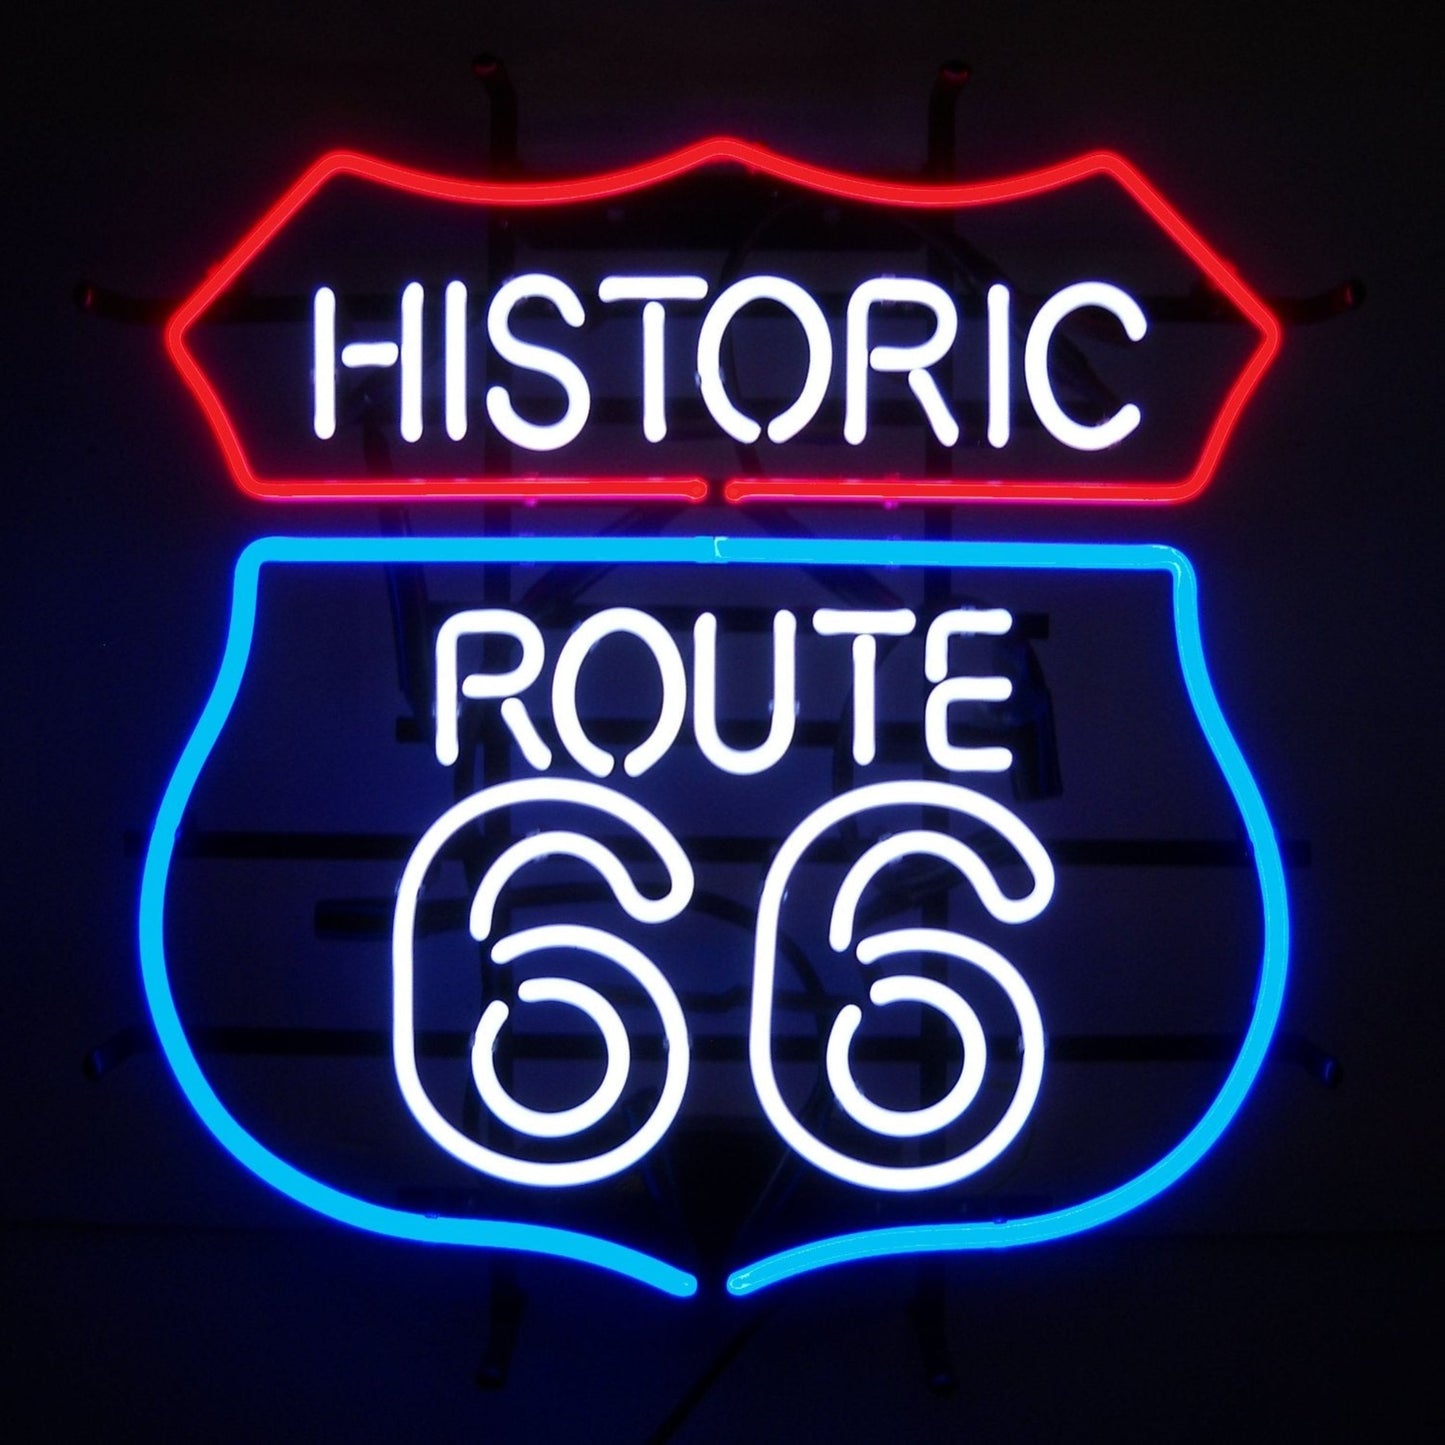 Vibrant Historic Route 66 neon sign in blue and red.